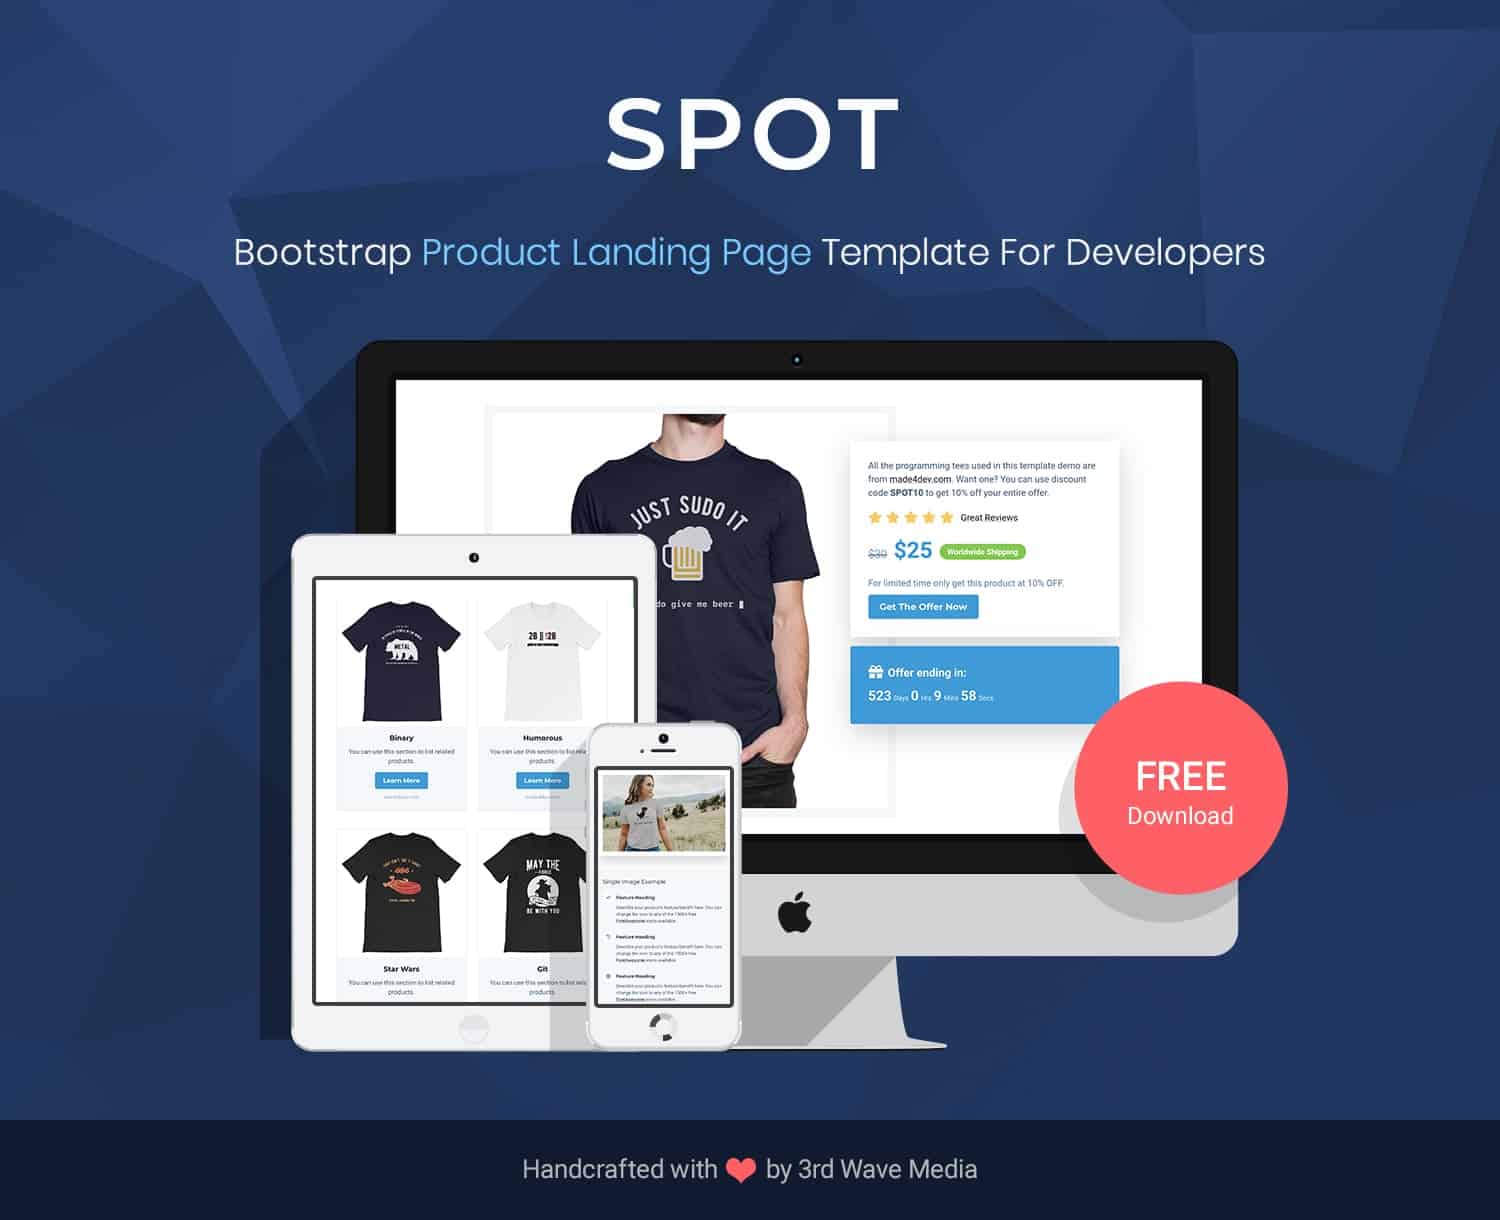 Bootstrap-Product-Landing-Page-Template-Spot-Promo